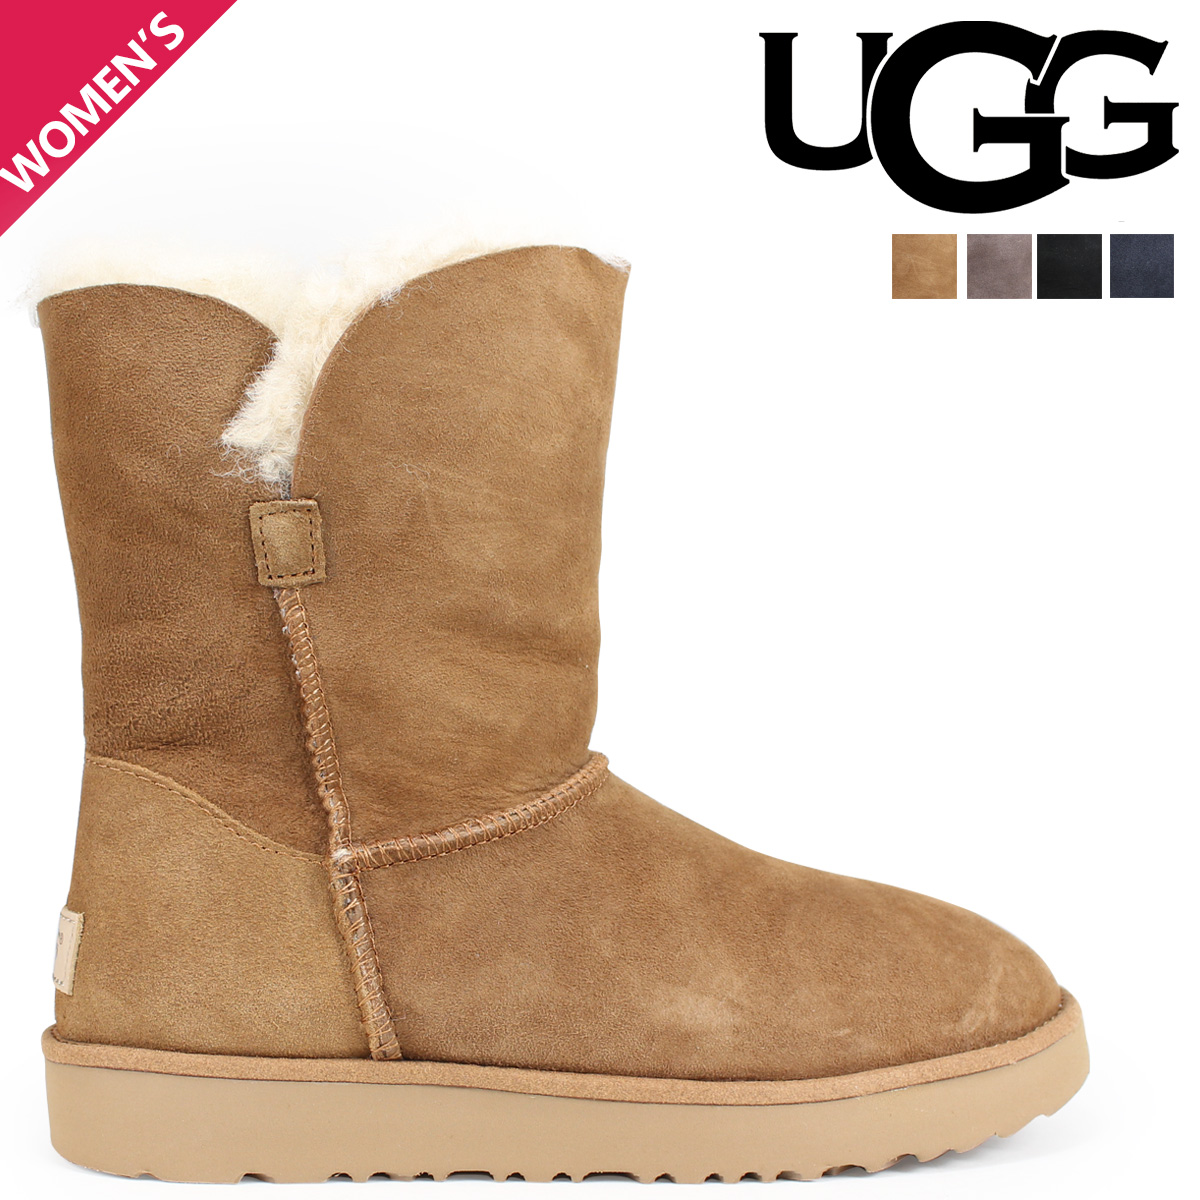 ugg boots shopping online